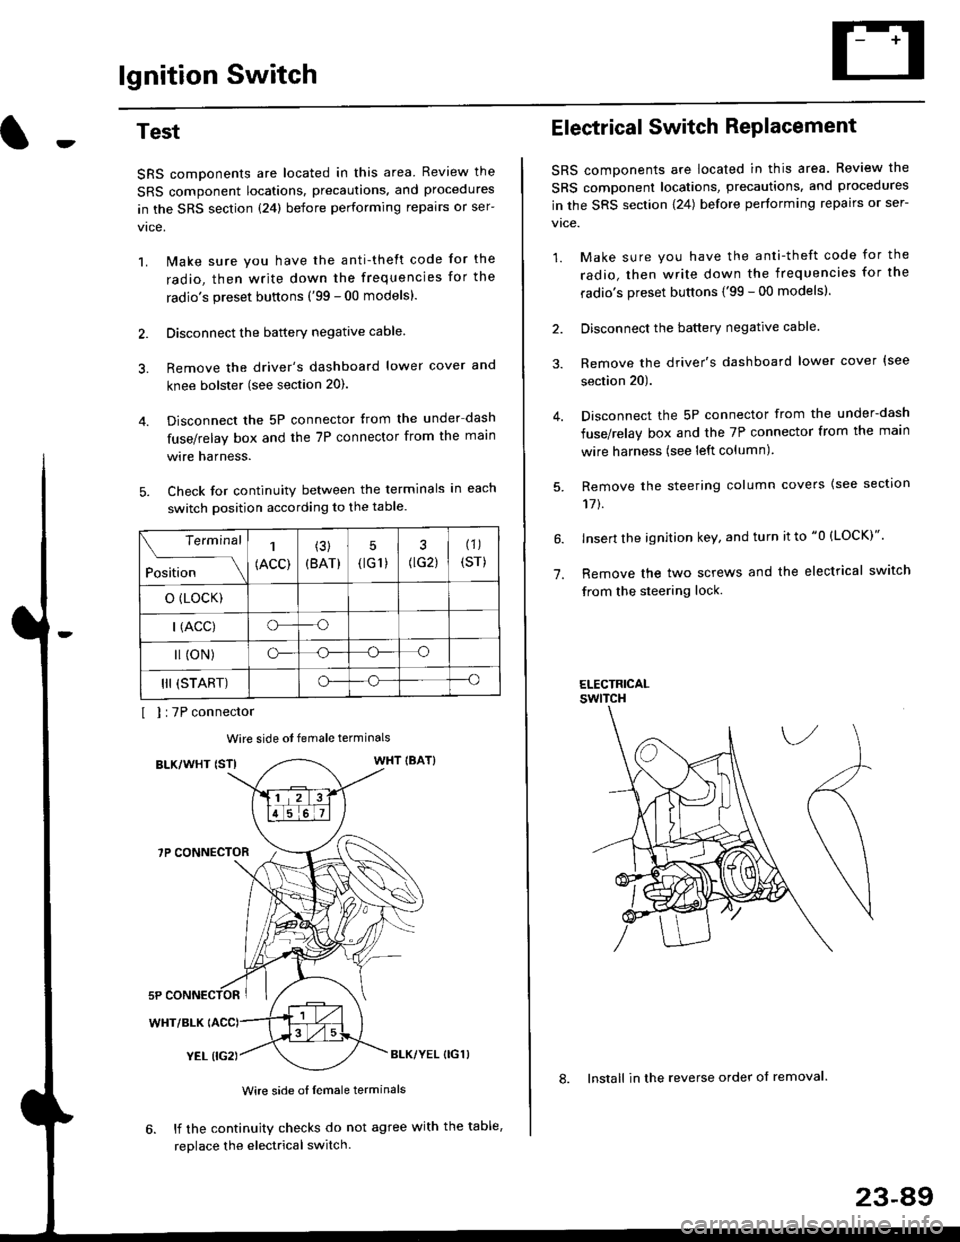 HONDA CIVIC 1996 6.G Owners Manual lgnition Switch
4.
Test
SRS components are located in this area Review the
SRS component locations. precautions. and procedures
in the SRS section {24} before performing repairs or ser-
1. i/ake sure 